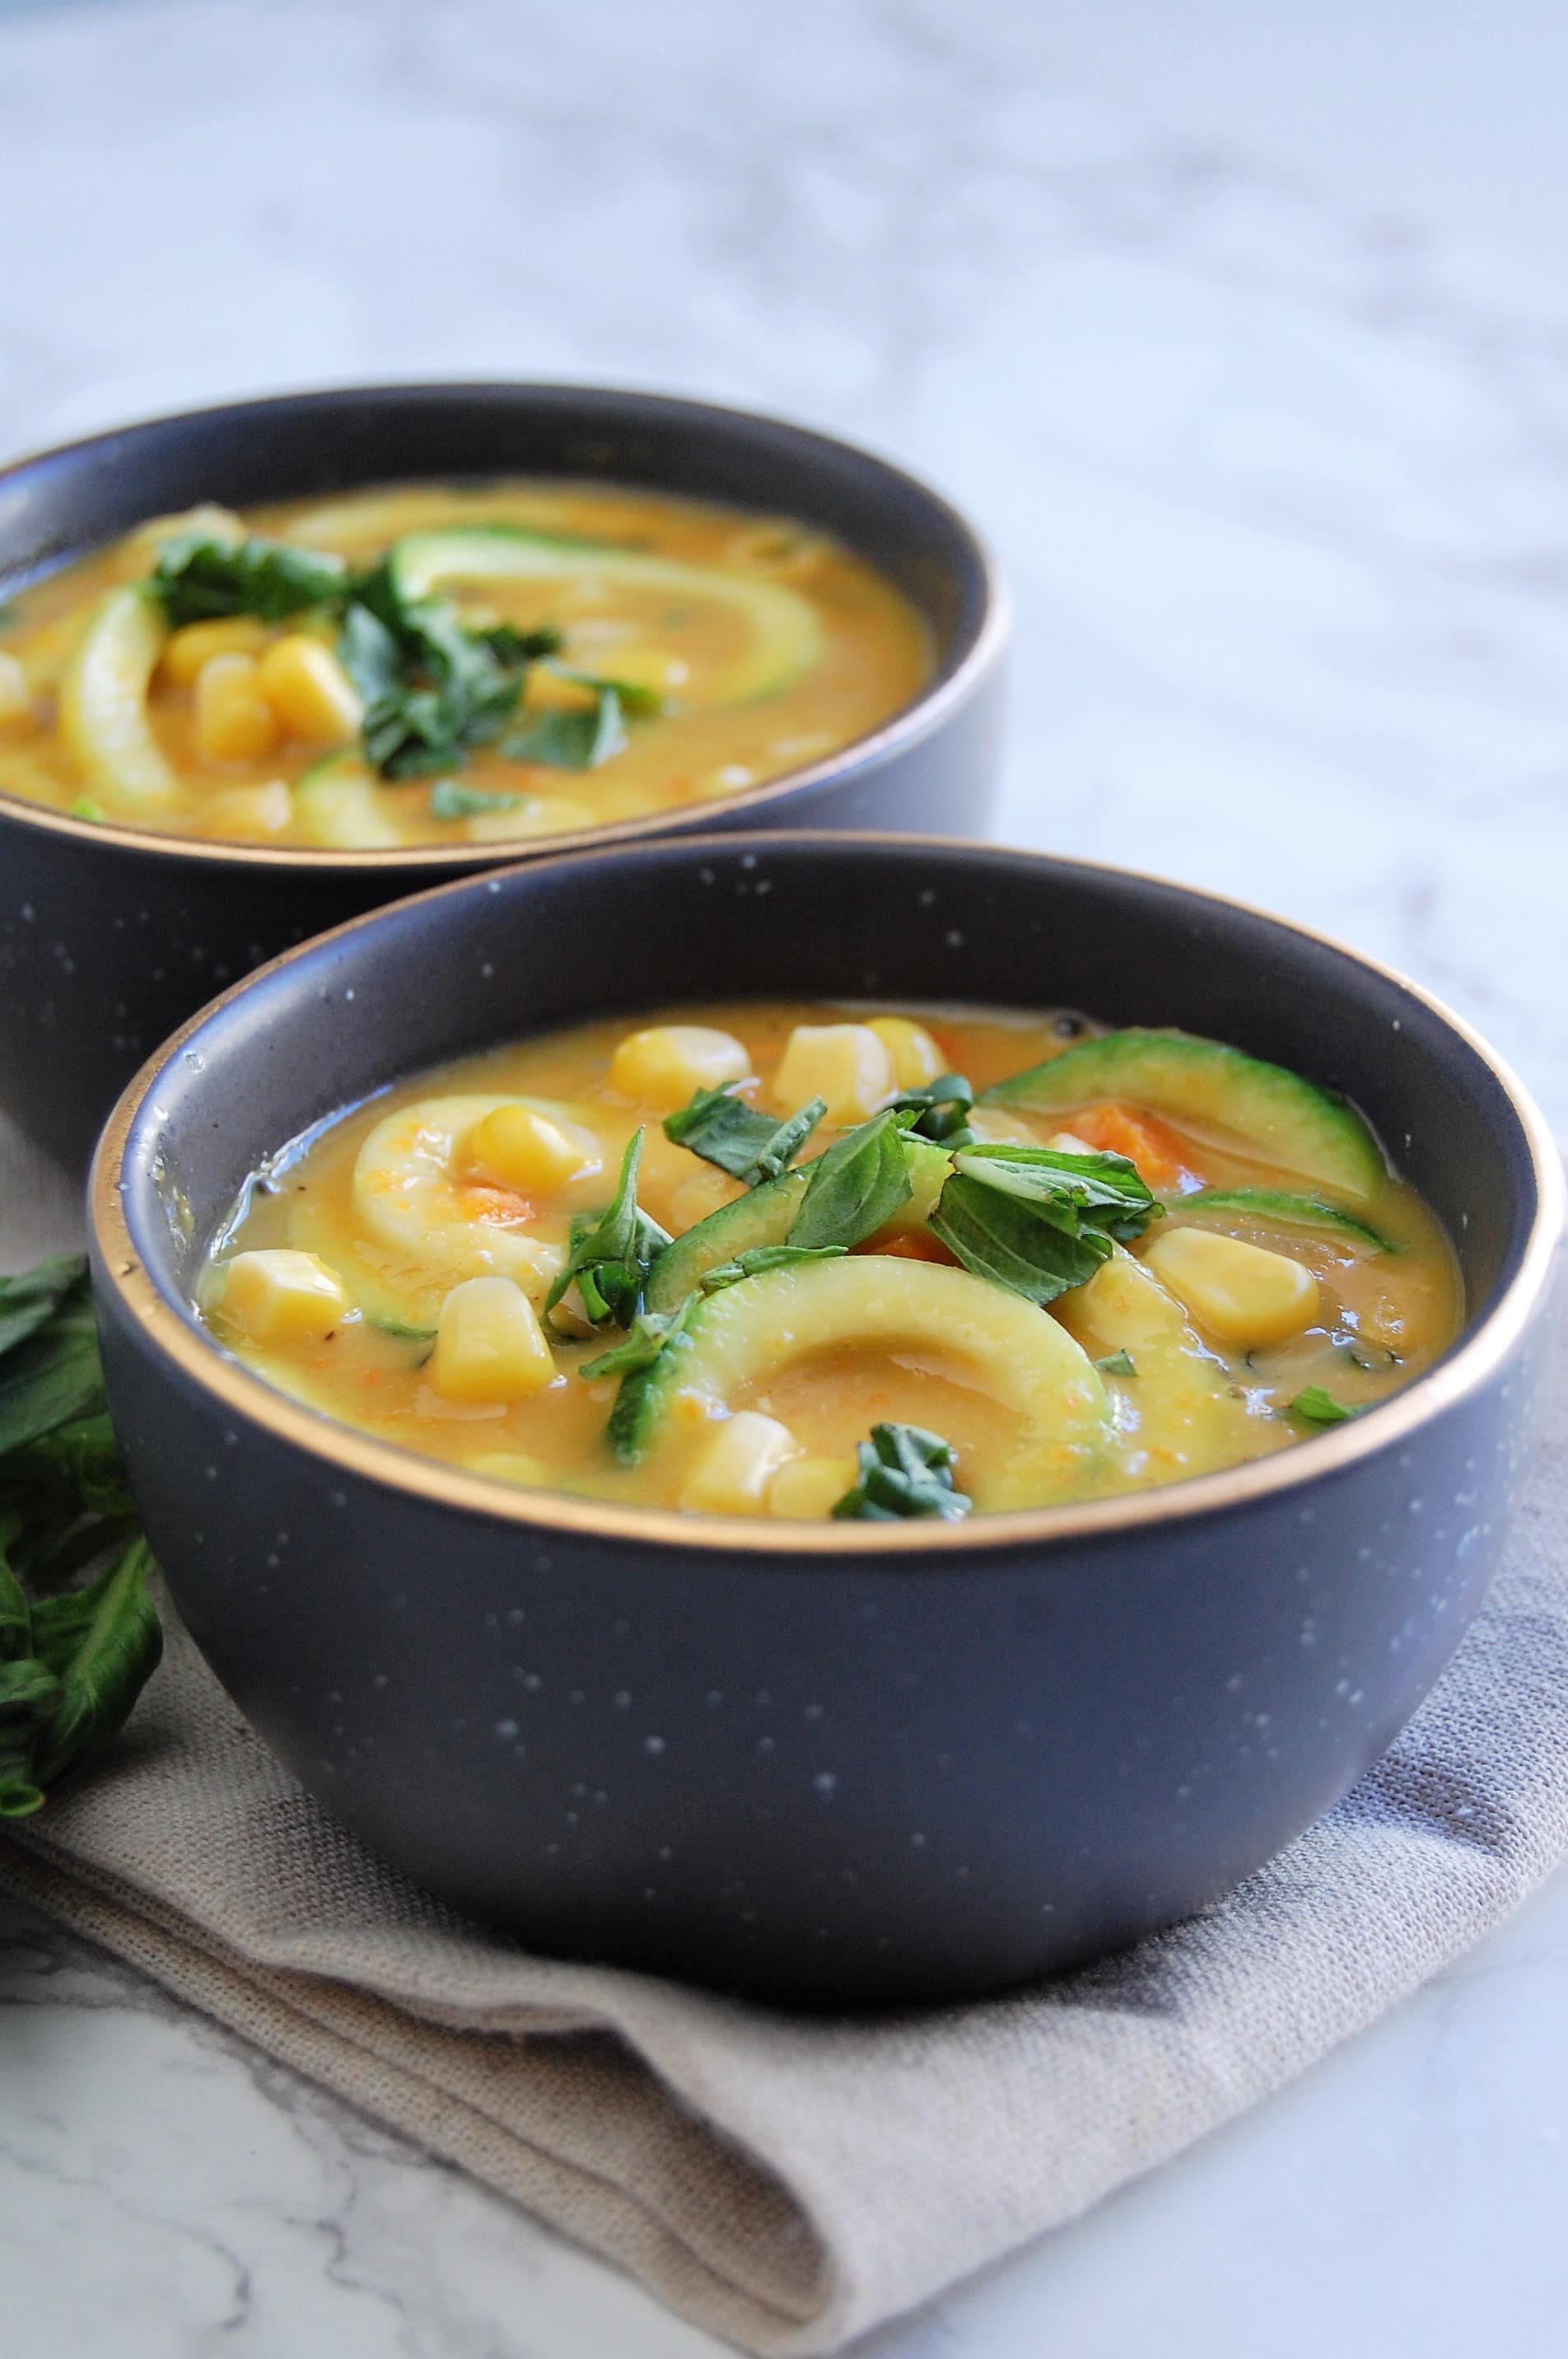 #ad Canned corn is elevated to an on-trend, beautiful and fresh Zucchini Noodle Summer Corn Chowder! IIt's also vegan and free of the top 8 most common food allergens. Get the delicious recipe from @nutritiontofit!